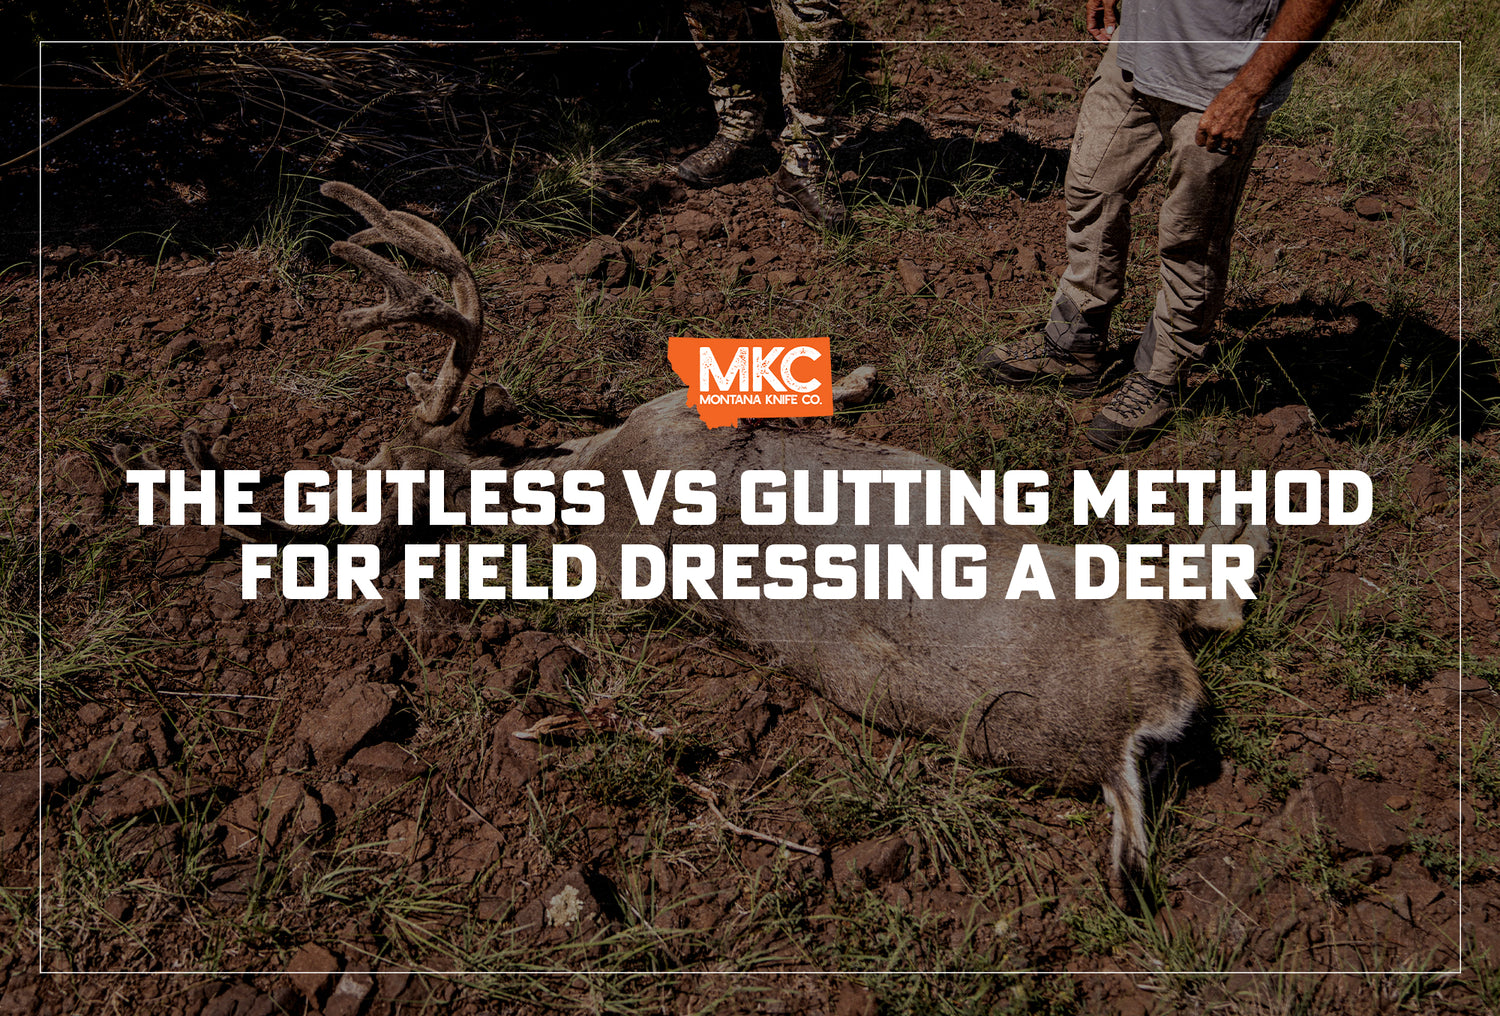 Gutless vs gutting method for field dressing a deer, with a dark overlay.